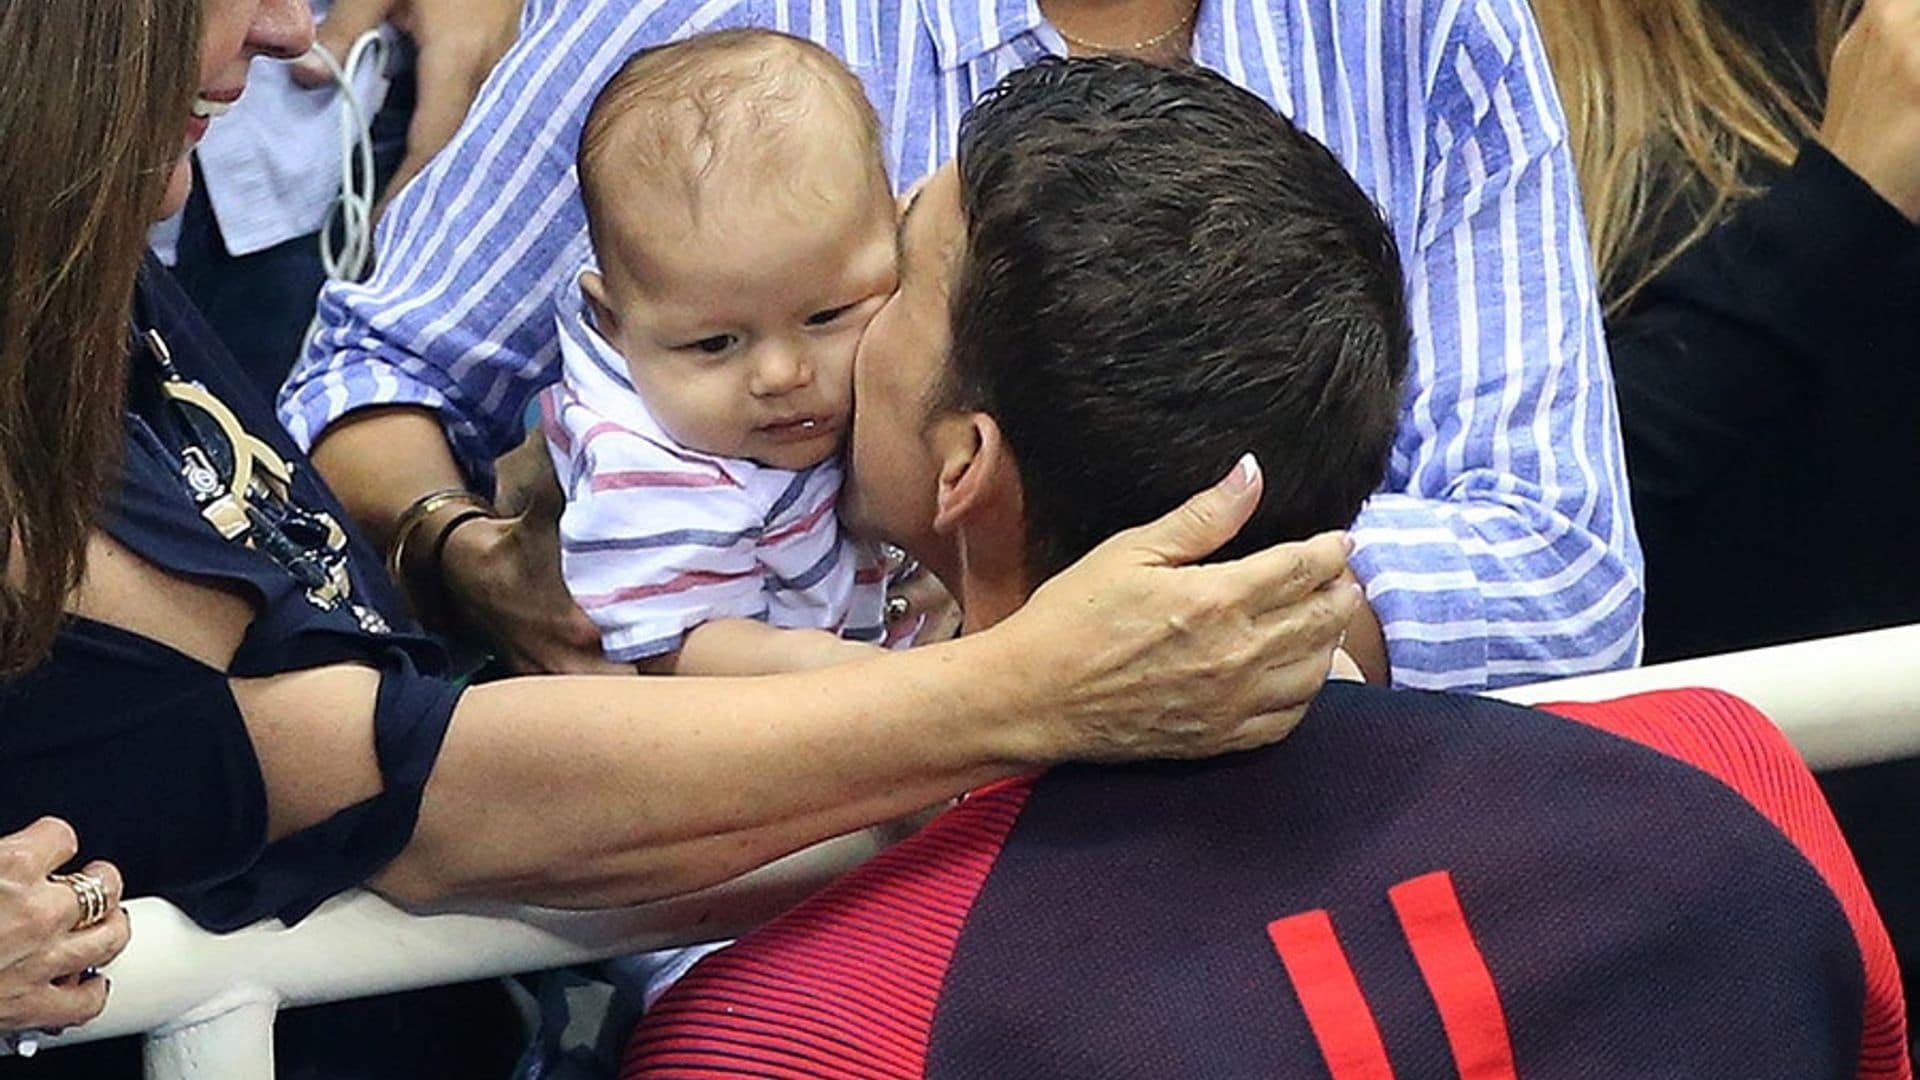 Michael Phelps celebrates Olympic gold with a kiss for baby Boomer